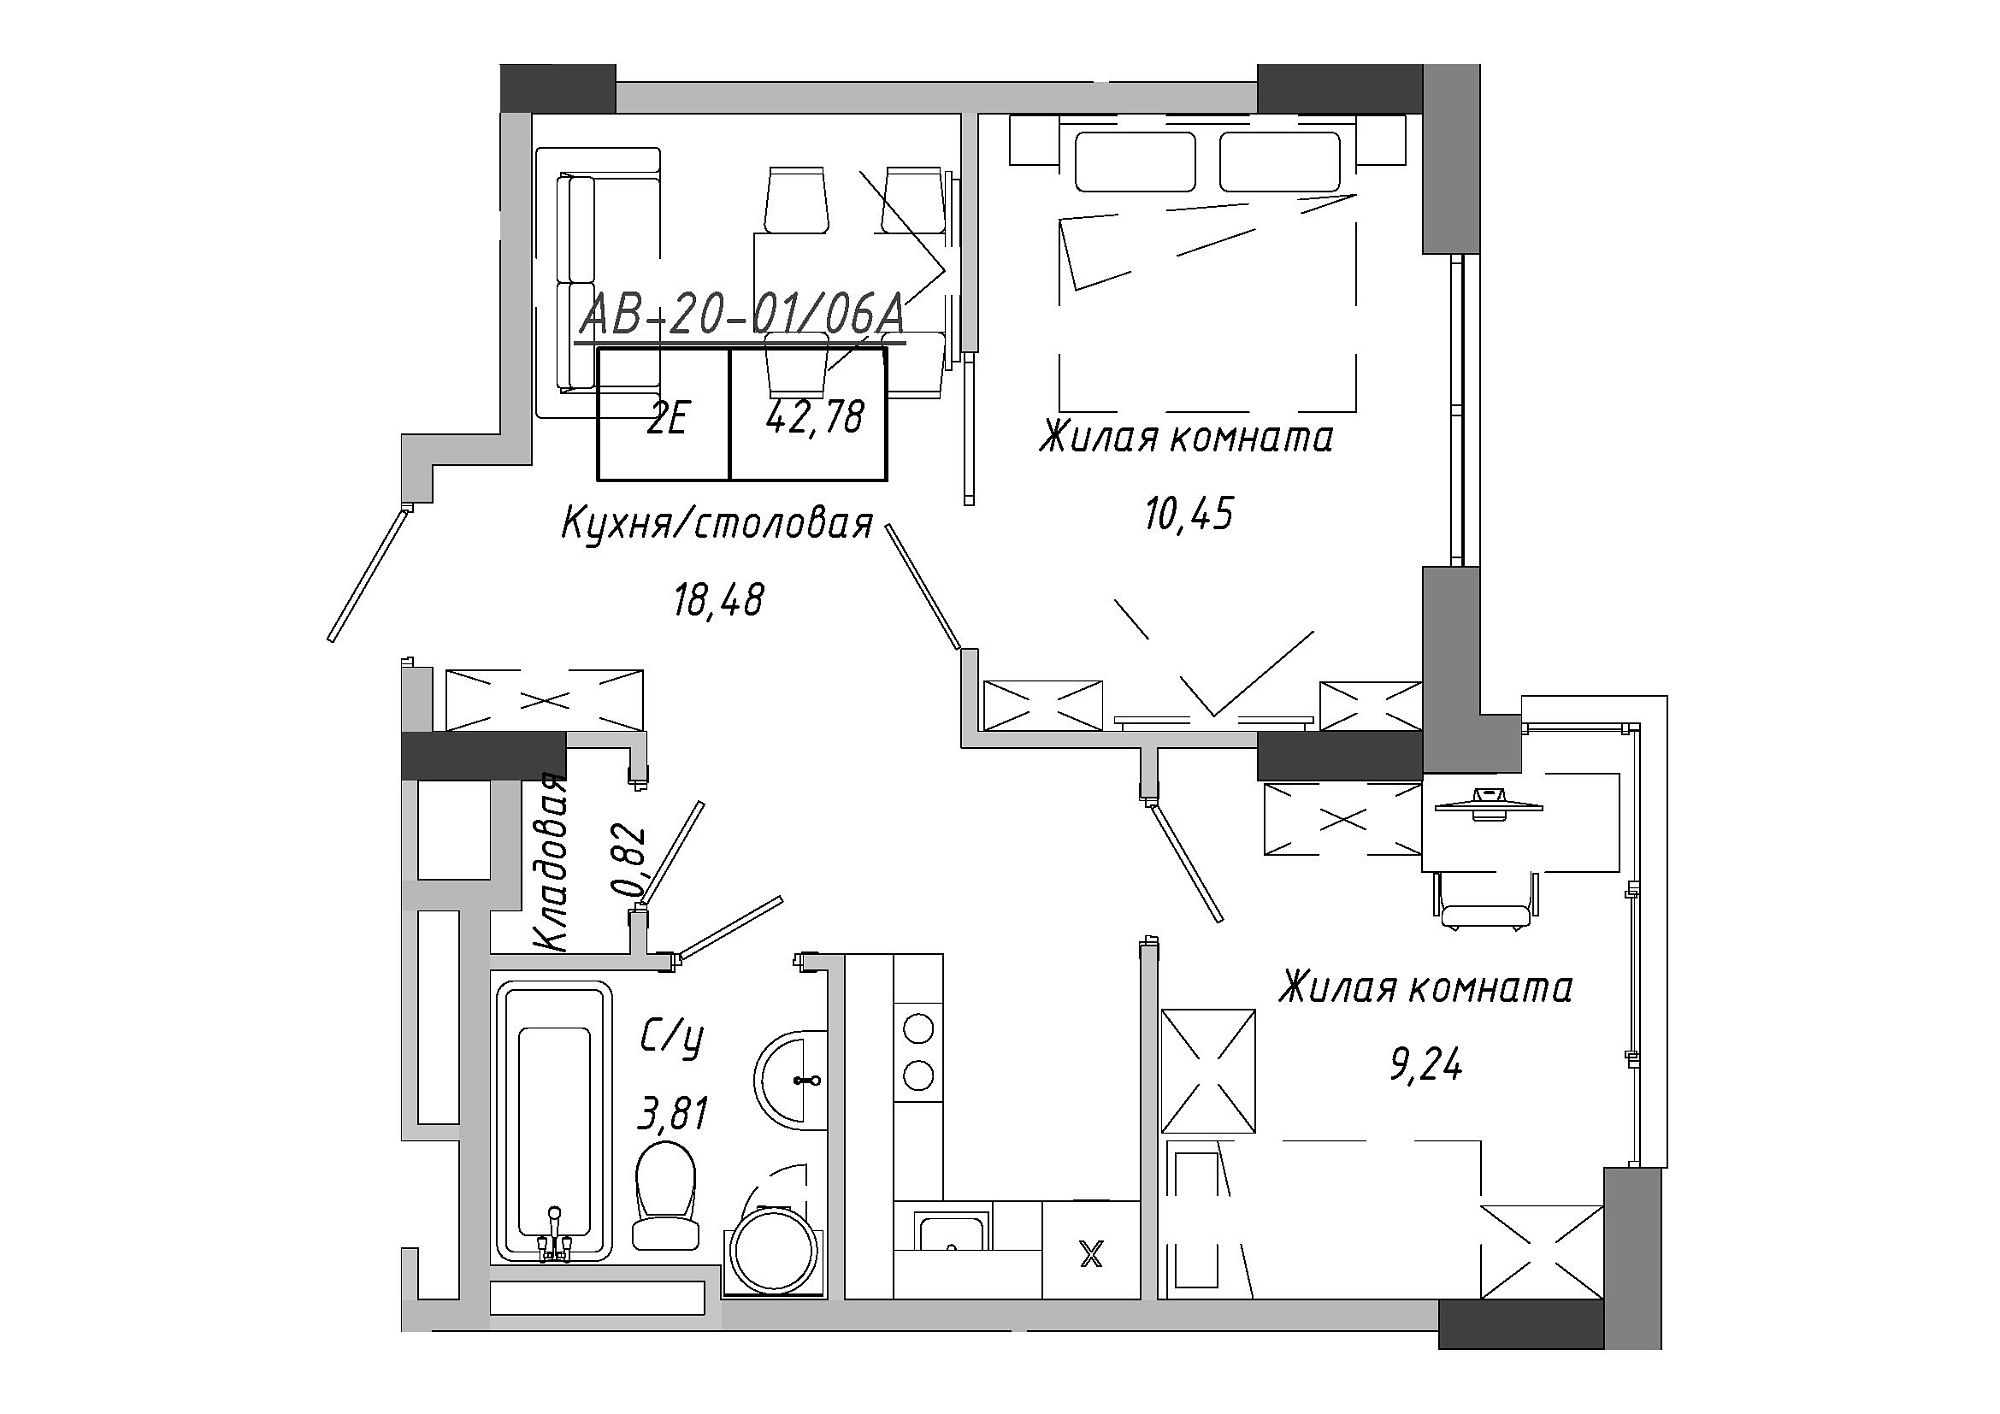 Planning 2-rm flats area 42.78m2, AB-20-01/0006а.